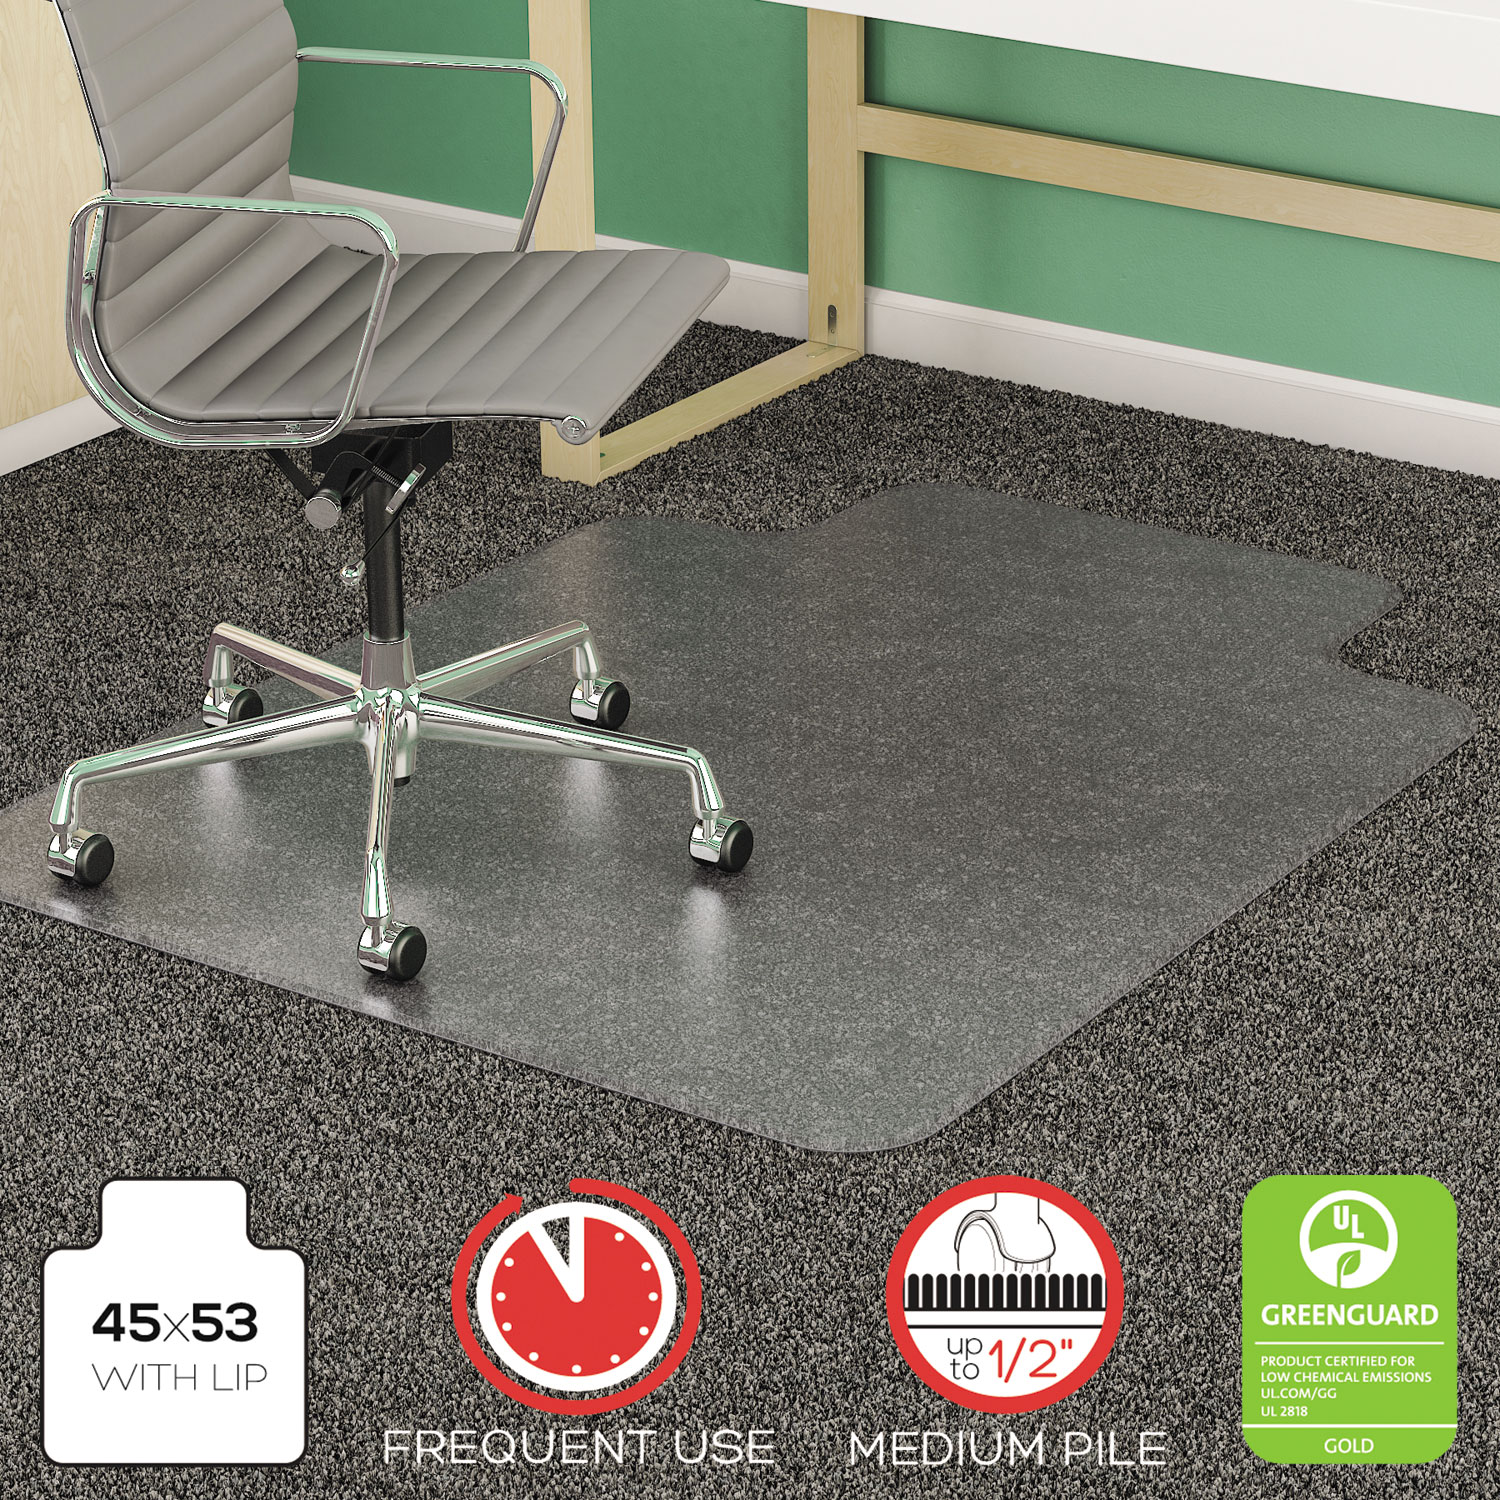  deflecto CM14233 SuperMat Frequent Use Chair Mat for Medium Pile Carpet, 45 x 53, Wide Lipped, Clear (DEFCM14233) 